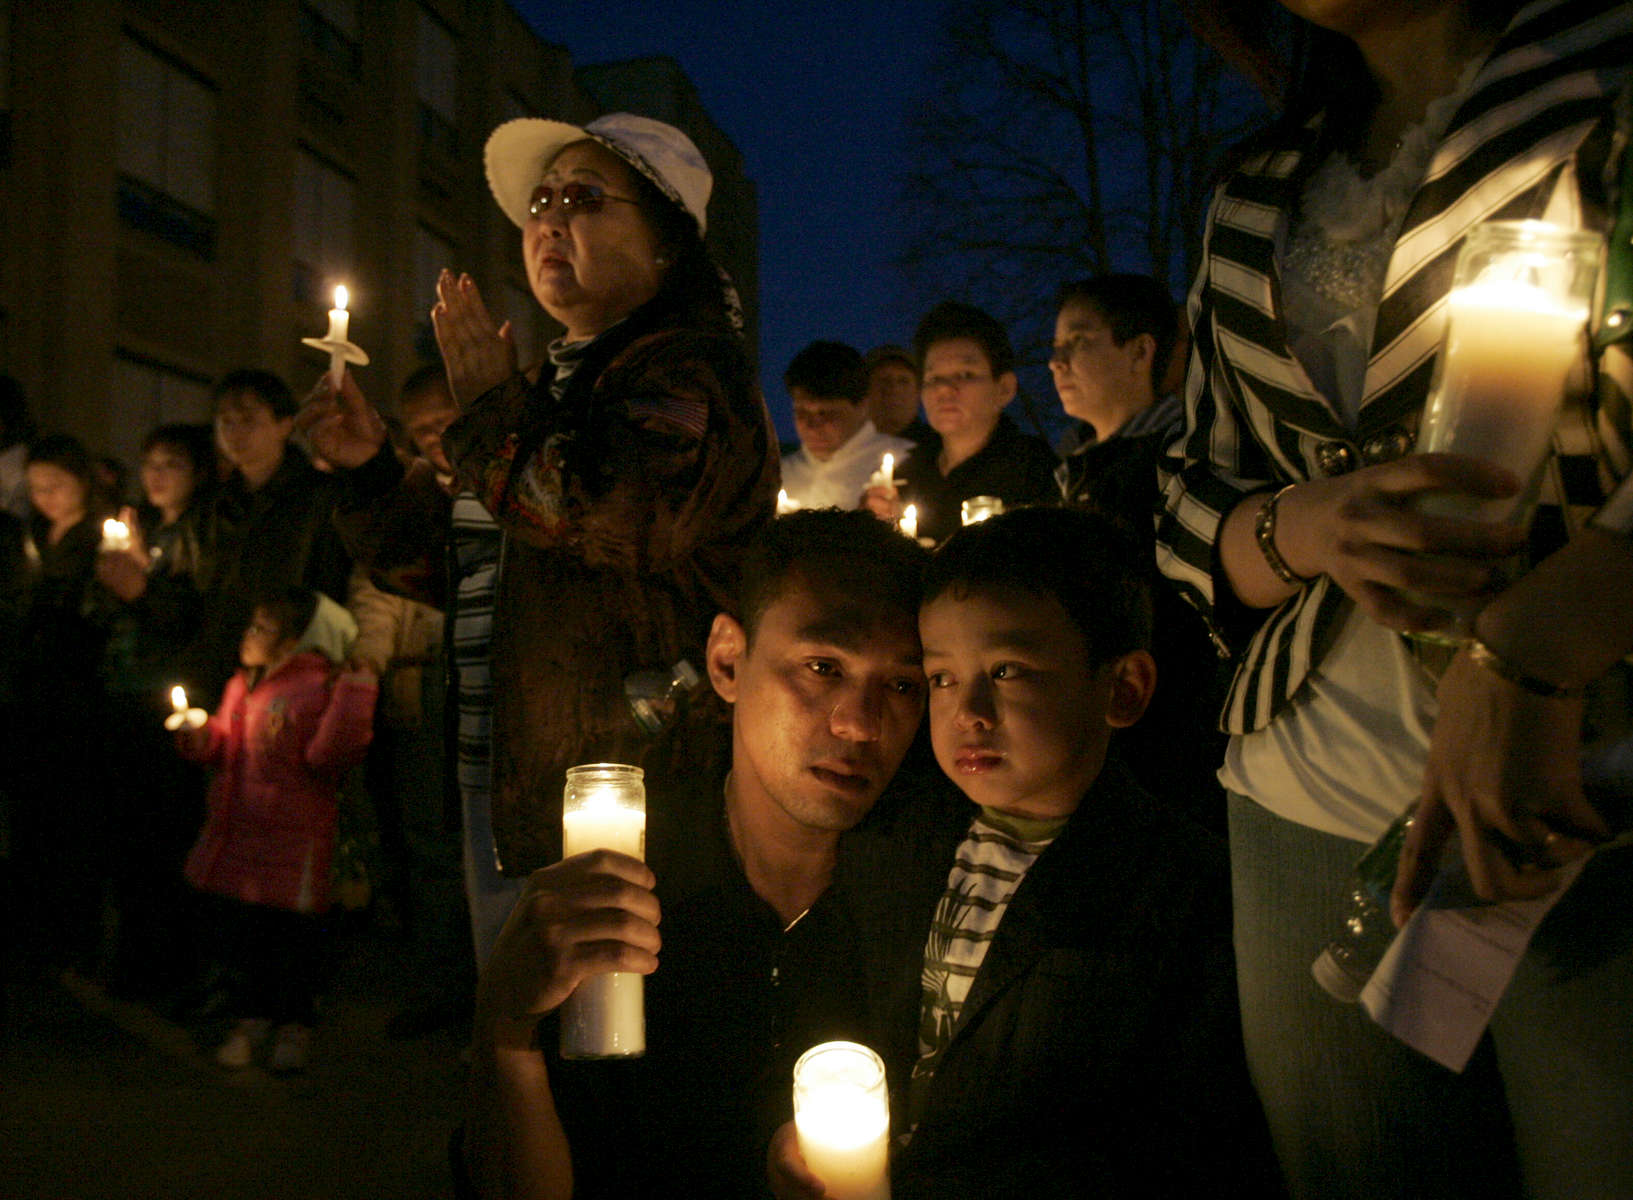 Thirteen people were killed after a gunman open fire inside American Civic Association before taking his own life in Binghamton, New York. Minh Nguyen, 38, and his son Henry, 6,  relative of Lan Ho, one of the 13 people who were killed, weep as they remember Lan at the candle light vigil held at West Junior High School at West Middle Avenue in Binghamton, New York on April 05, 2009.  